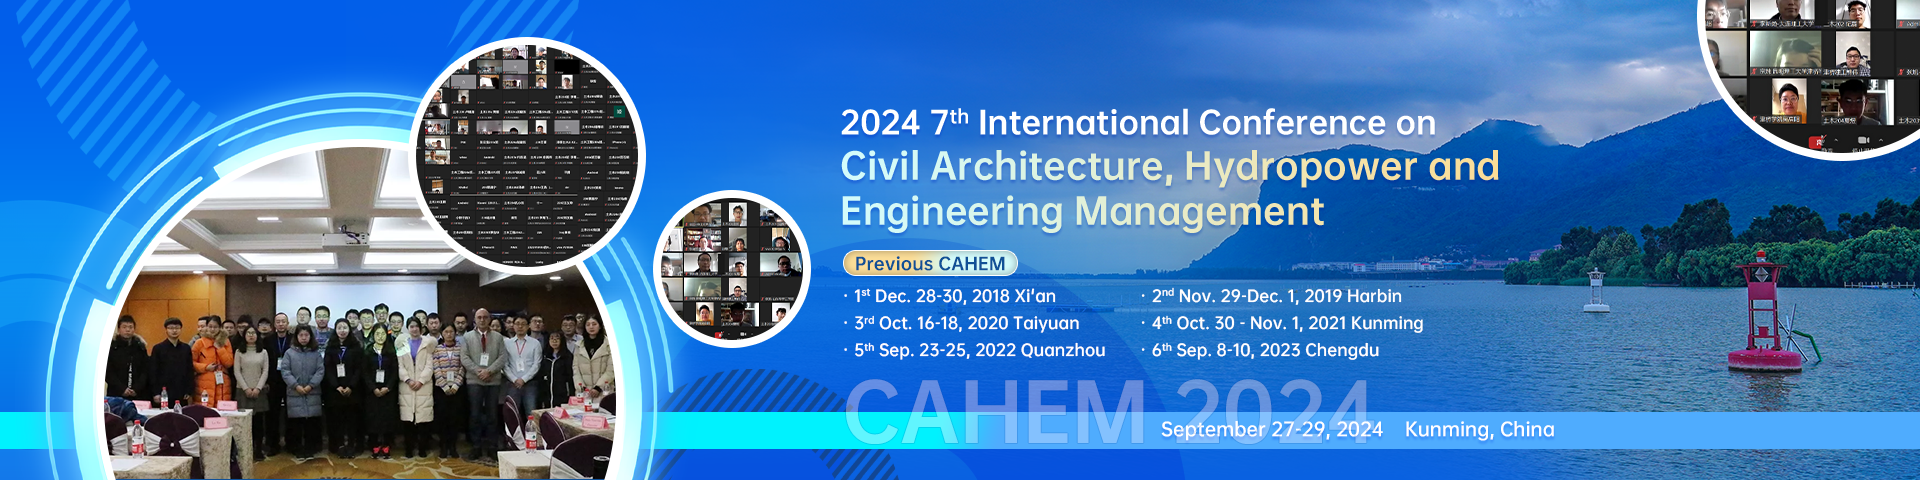 2024 7th International Conference on Civil Architecture, Hydropower and Engineering Management (CAHEM 2024), Kunming, Yunnan, China